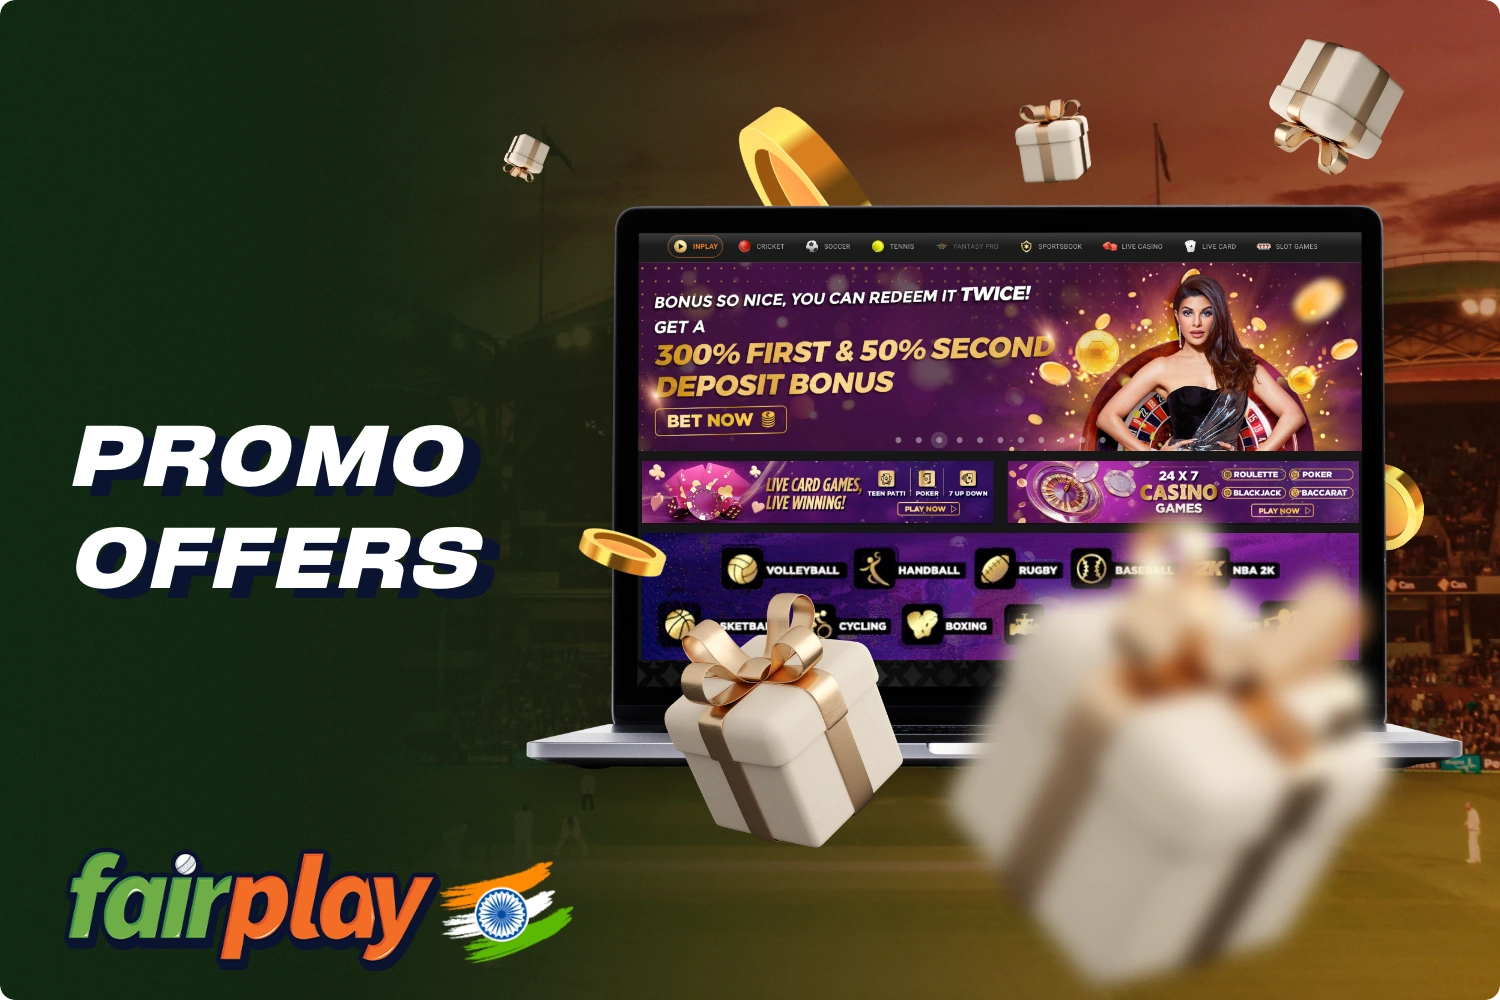 Fairplay offers its Indian users many different promotions to get extra bonuses